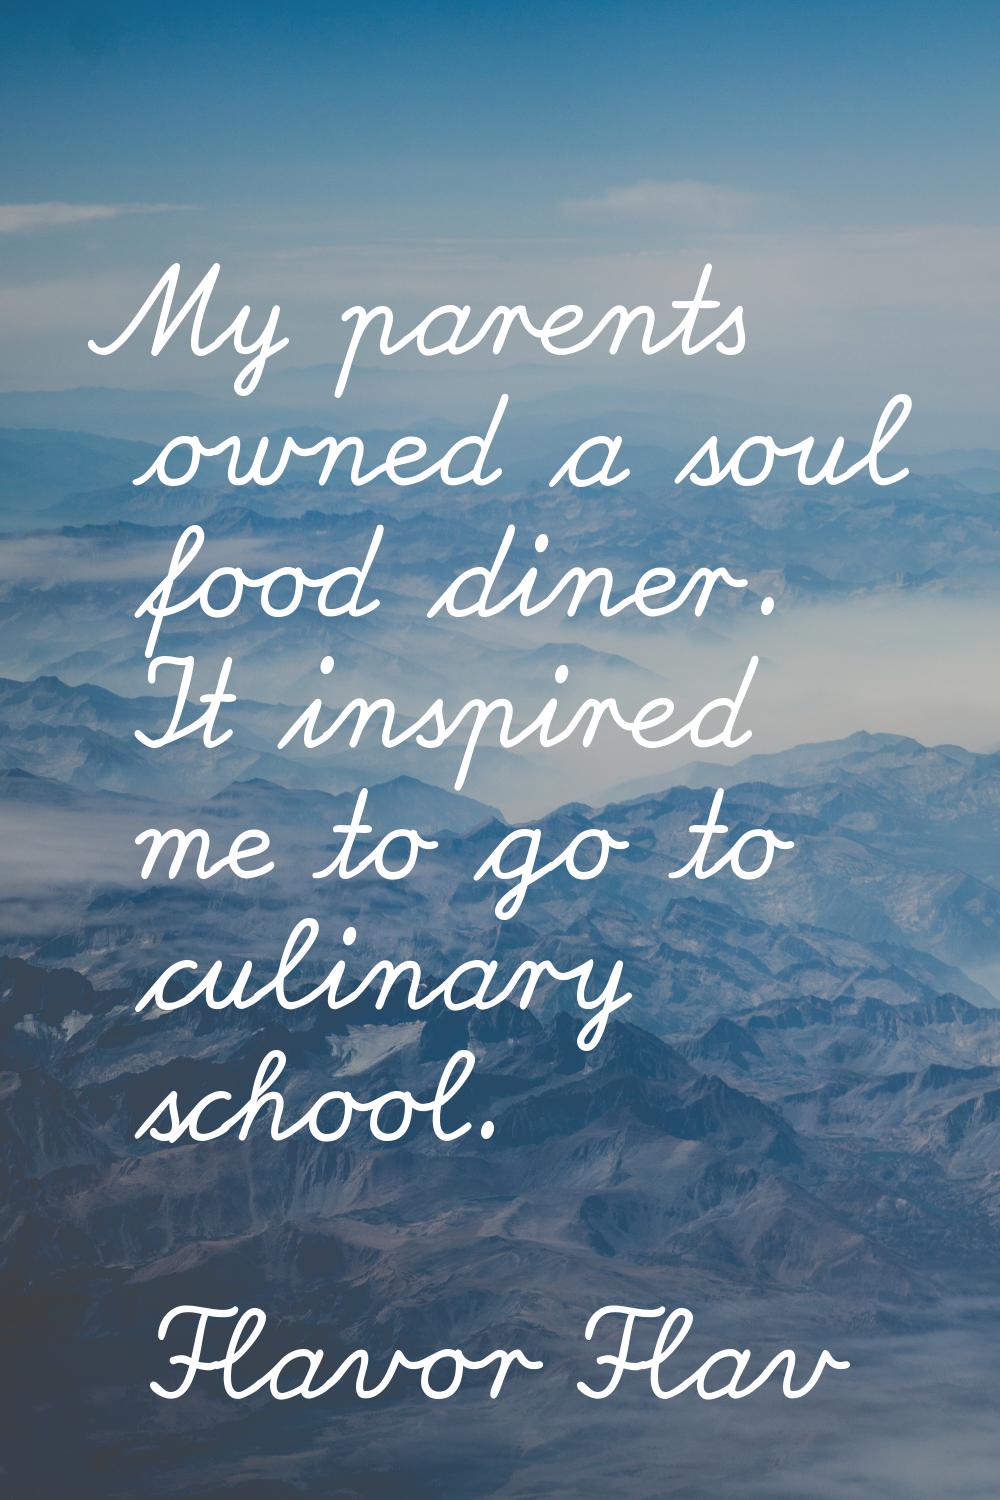 My parents owned a soul food diner. It inspired me to go to culinary school.